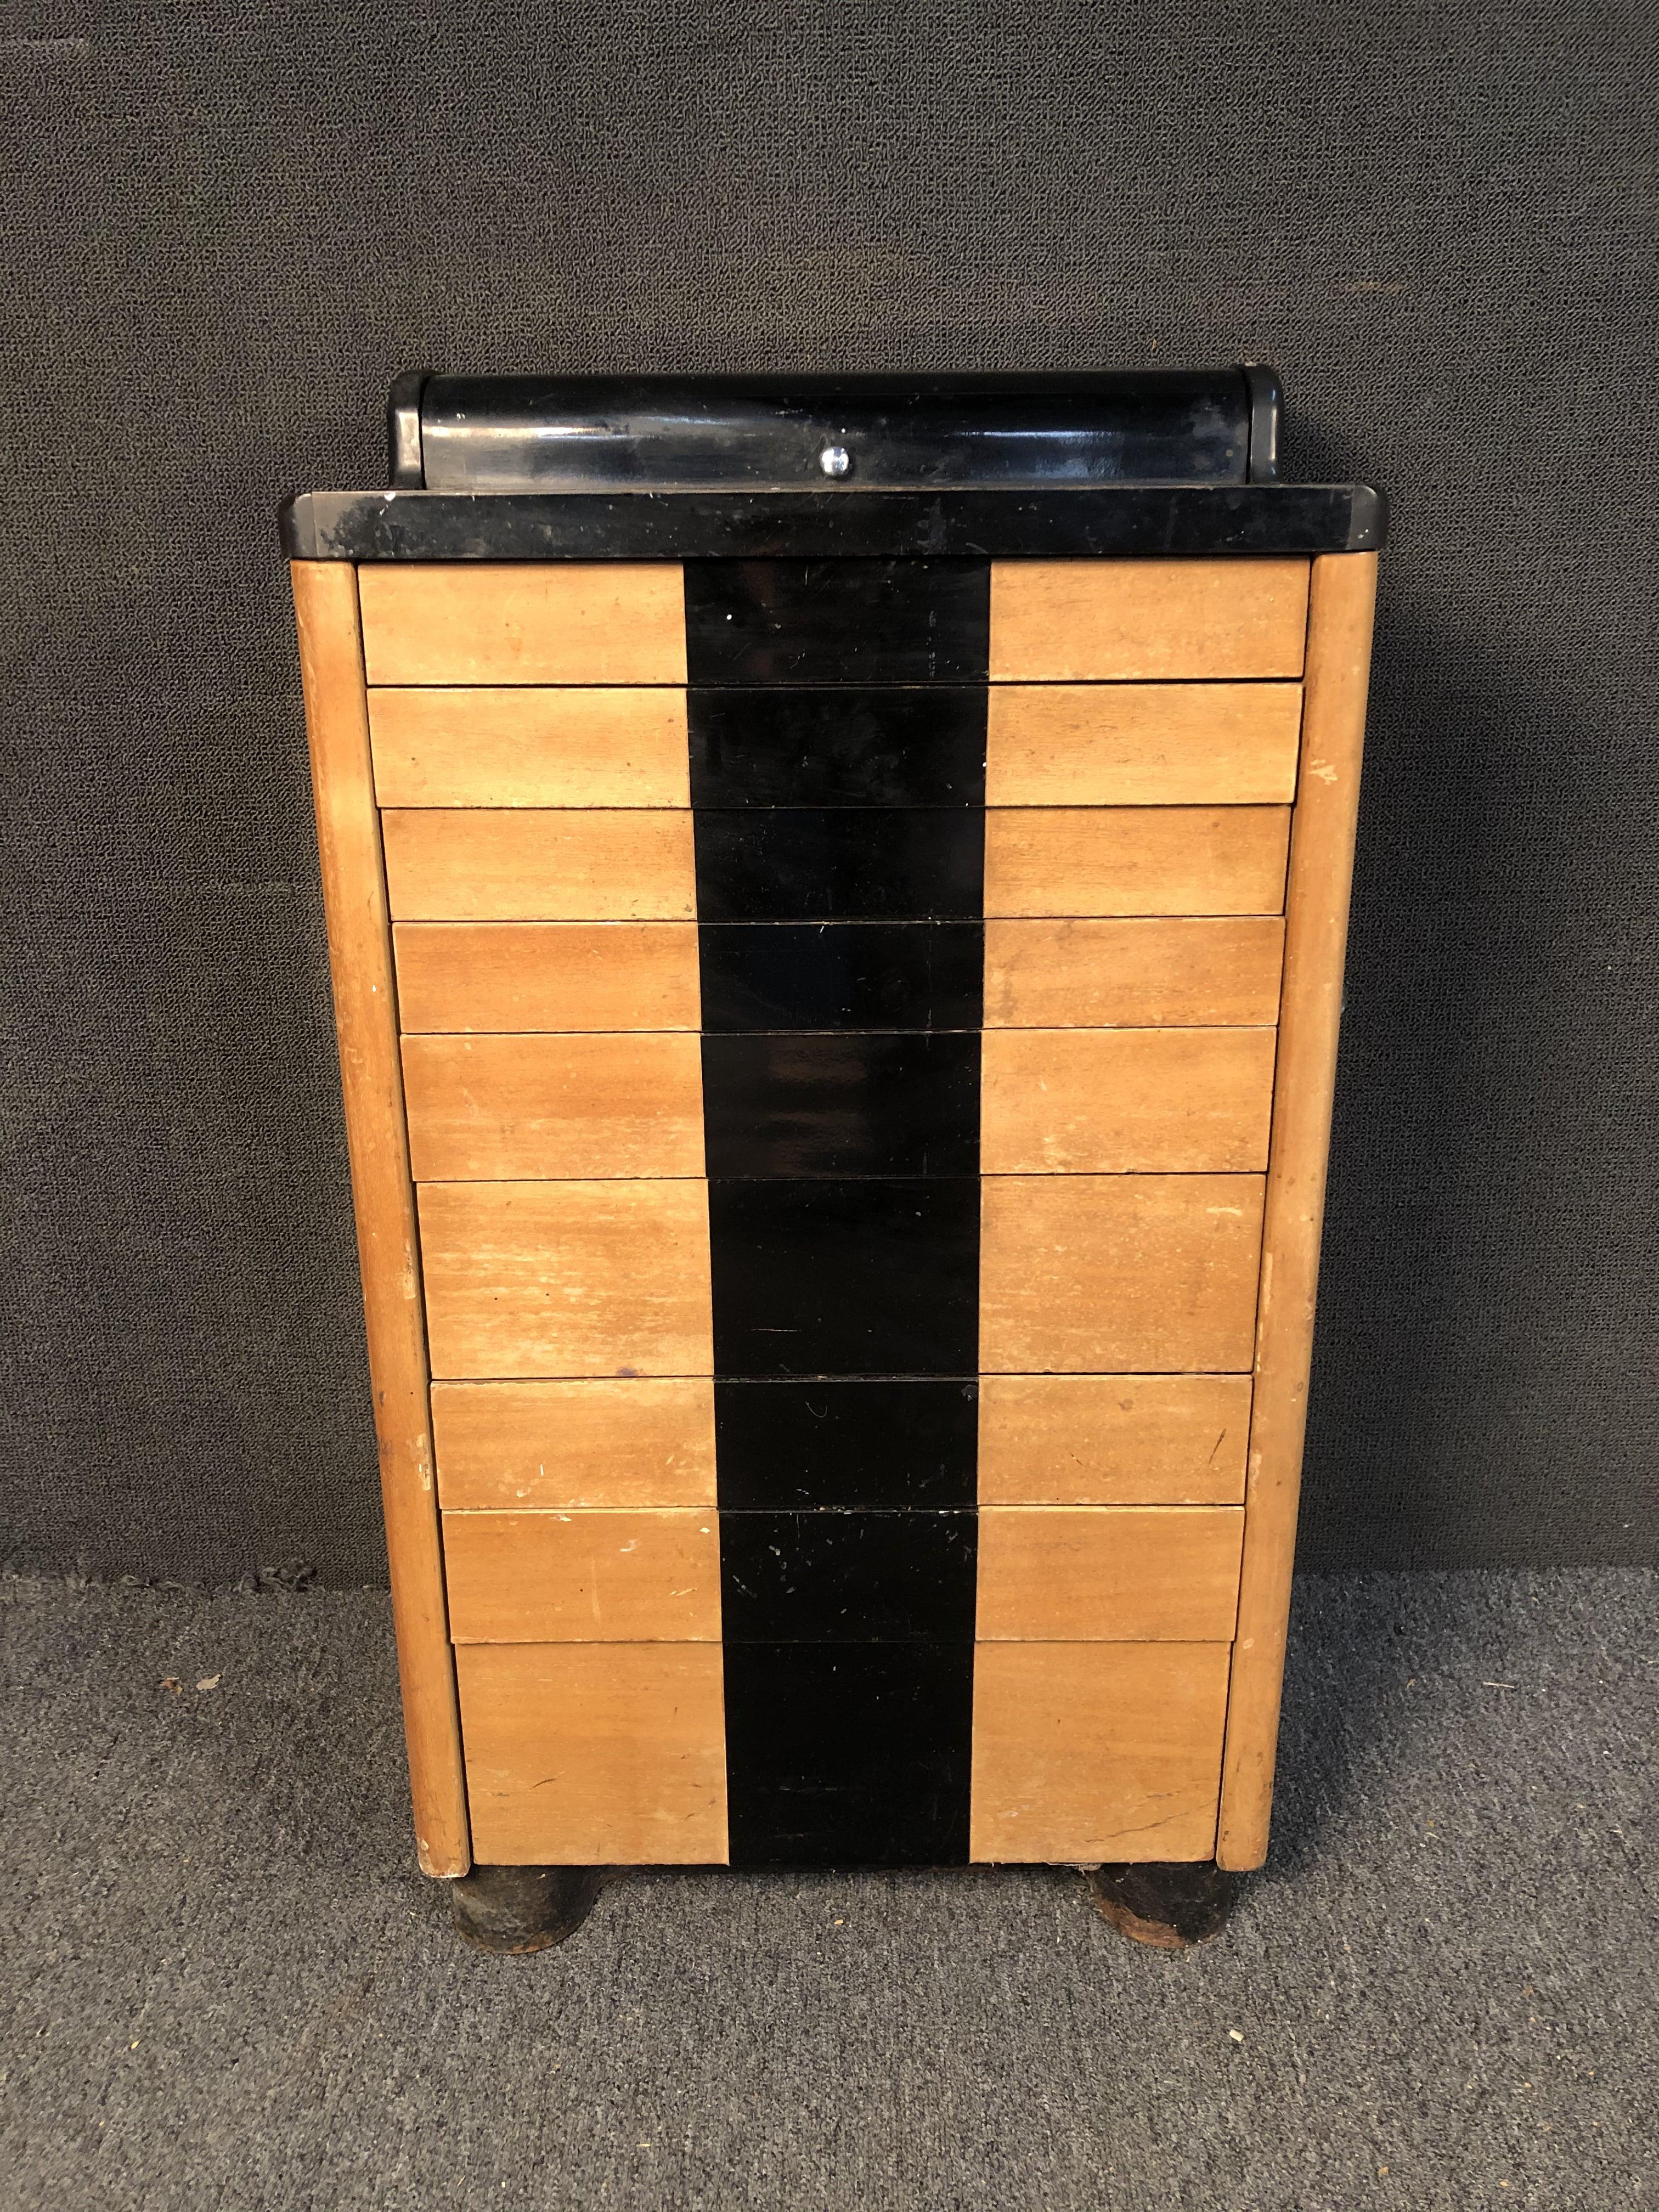 Vintage Medical Cabinet by W.D Allison Co. Cabinet features nine graduated drawers set in a sturdy metal frame with casters and steel handles. Push-release drawers offer optimal organization in any setting, fantastic piece of vintage apothecary